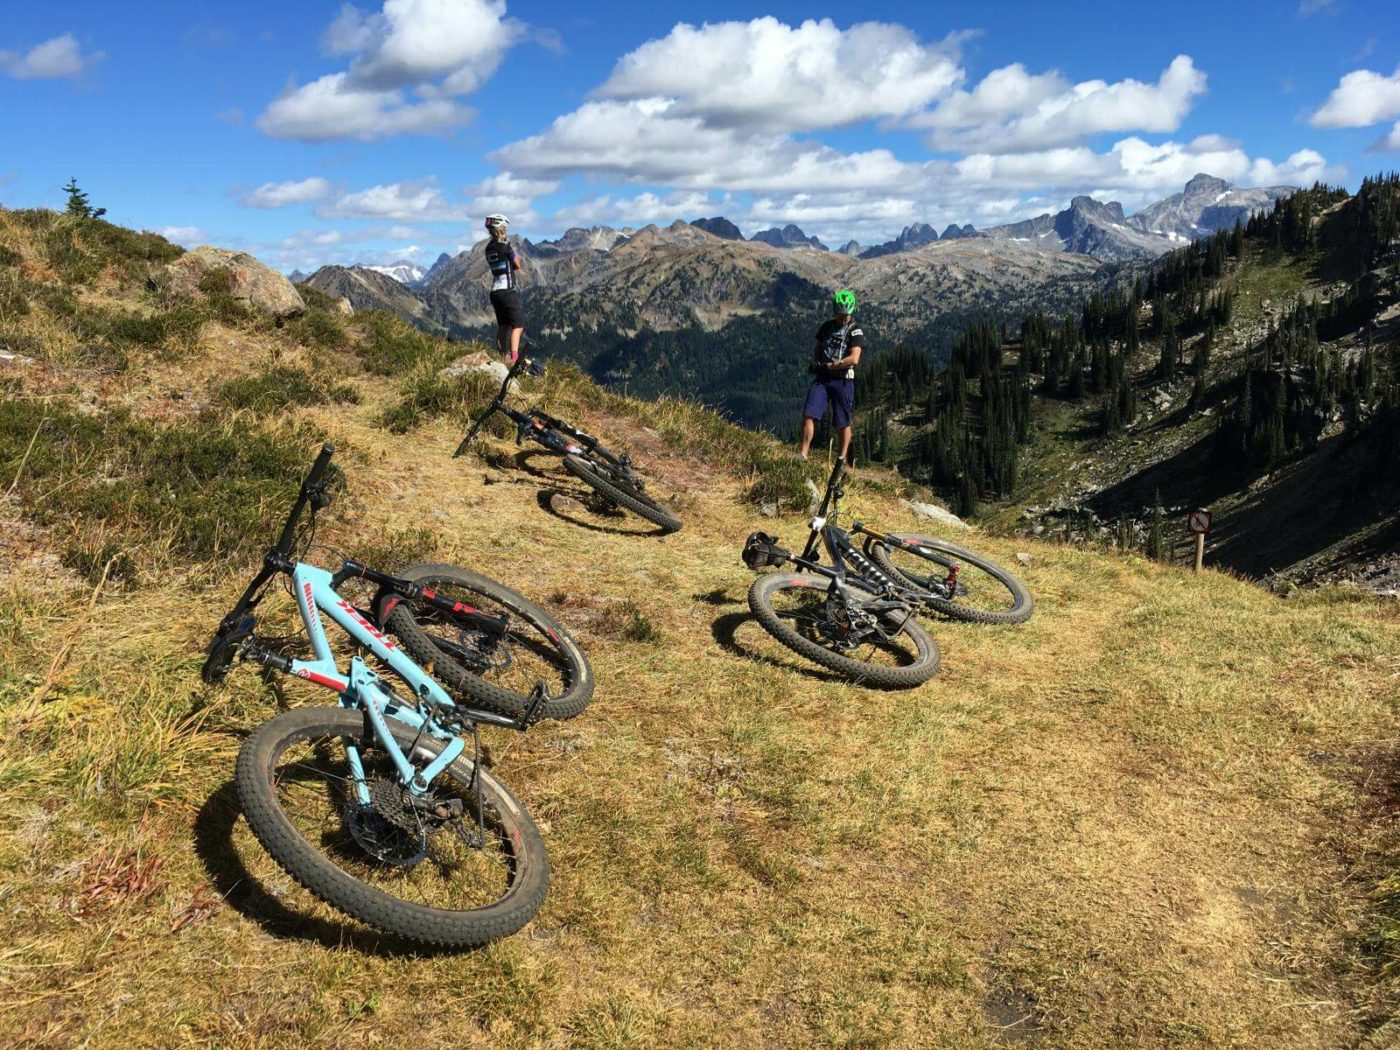 Three mountain bikes laying on the ground and two mountain bikers standing and looking out over the mountain valley